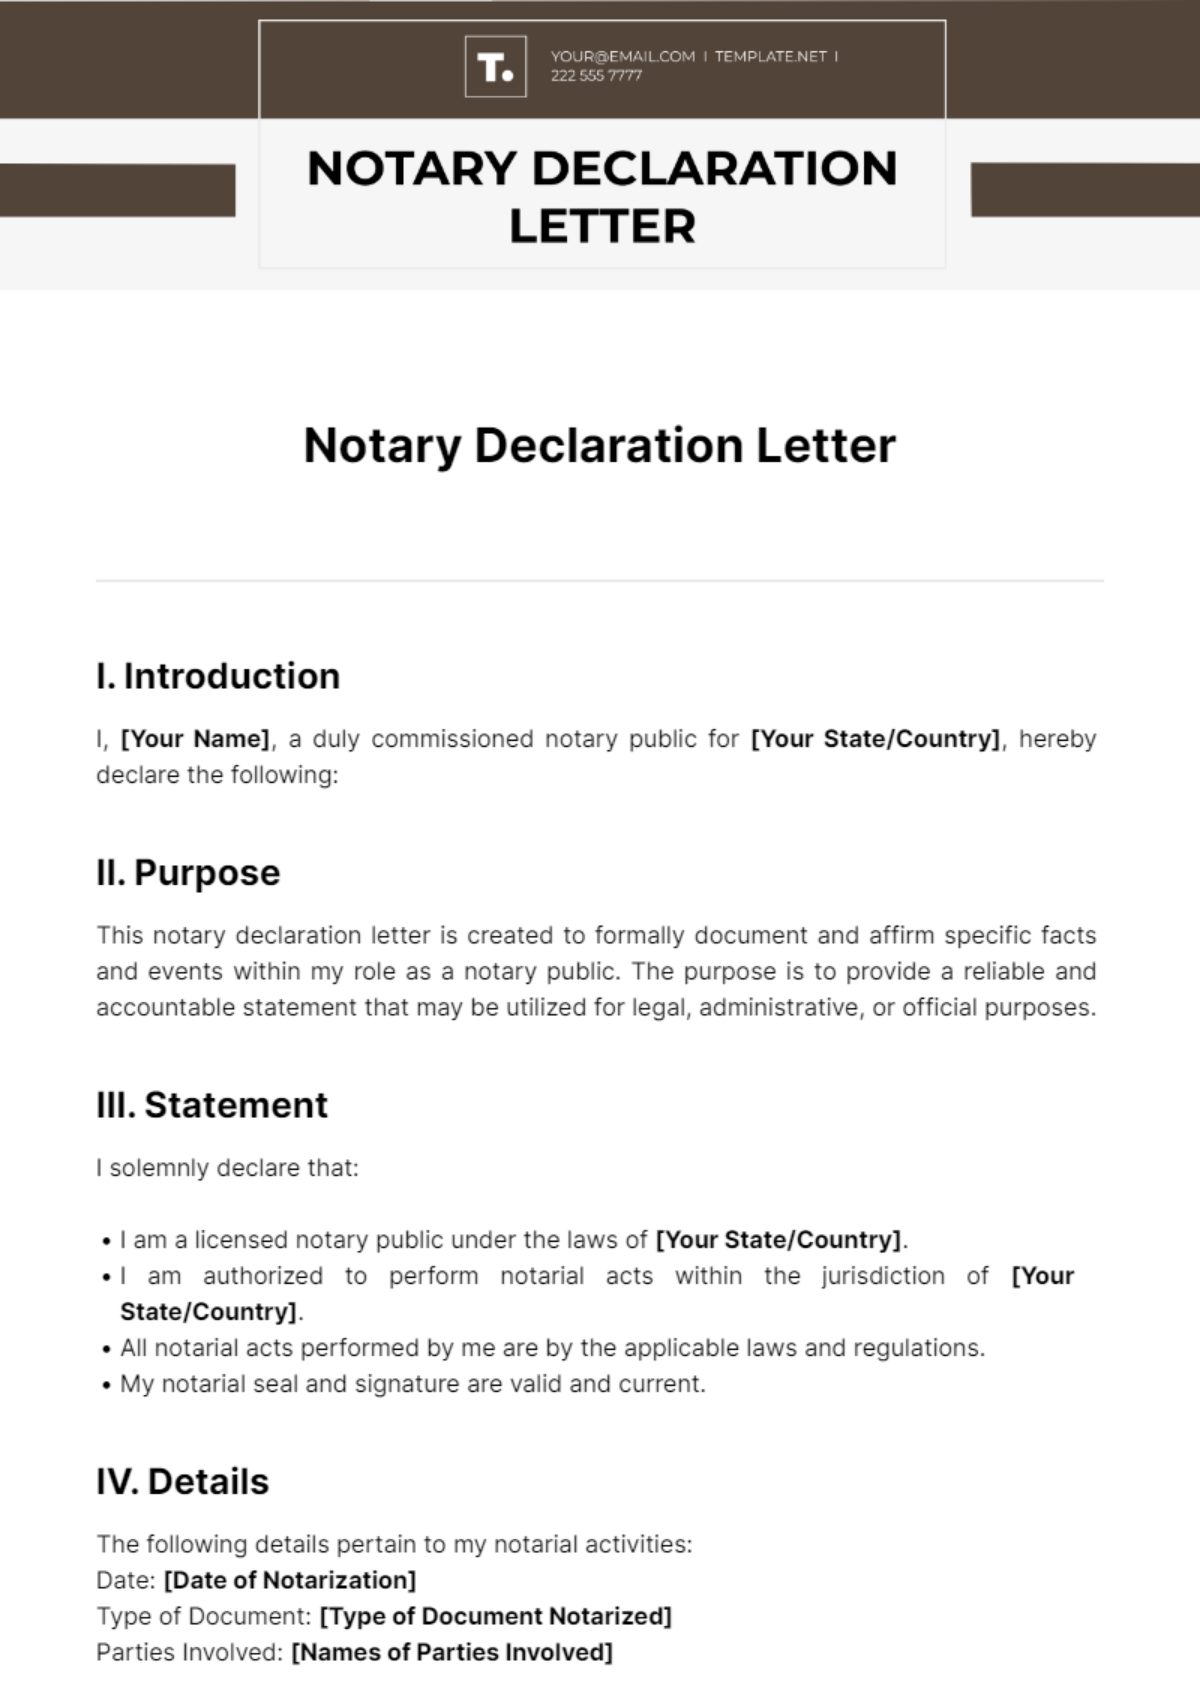 Notary Declaration Letter Template